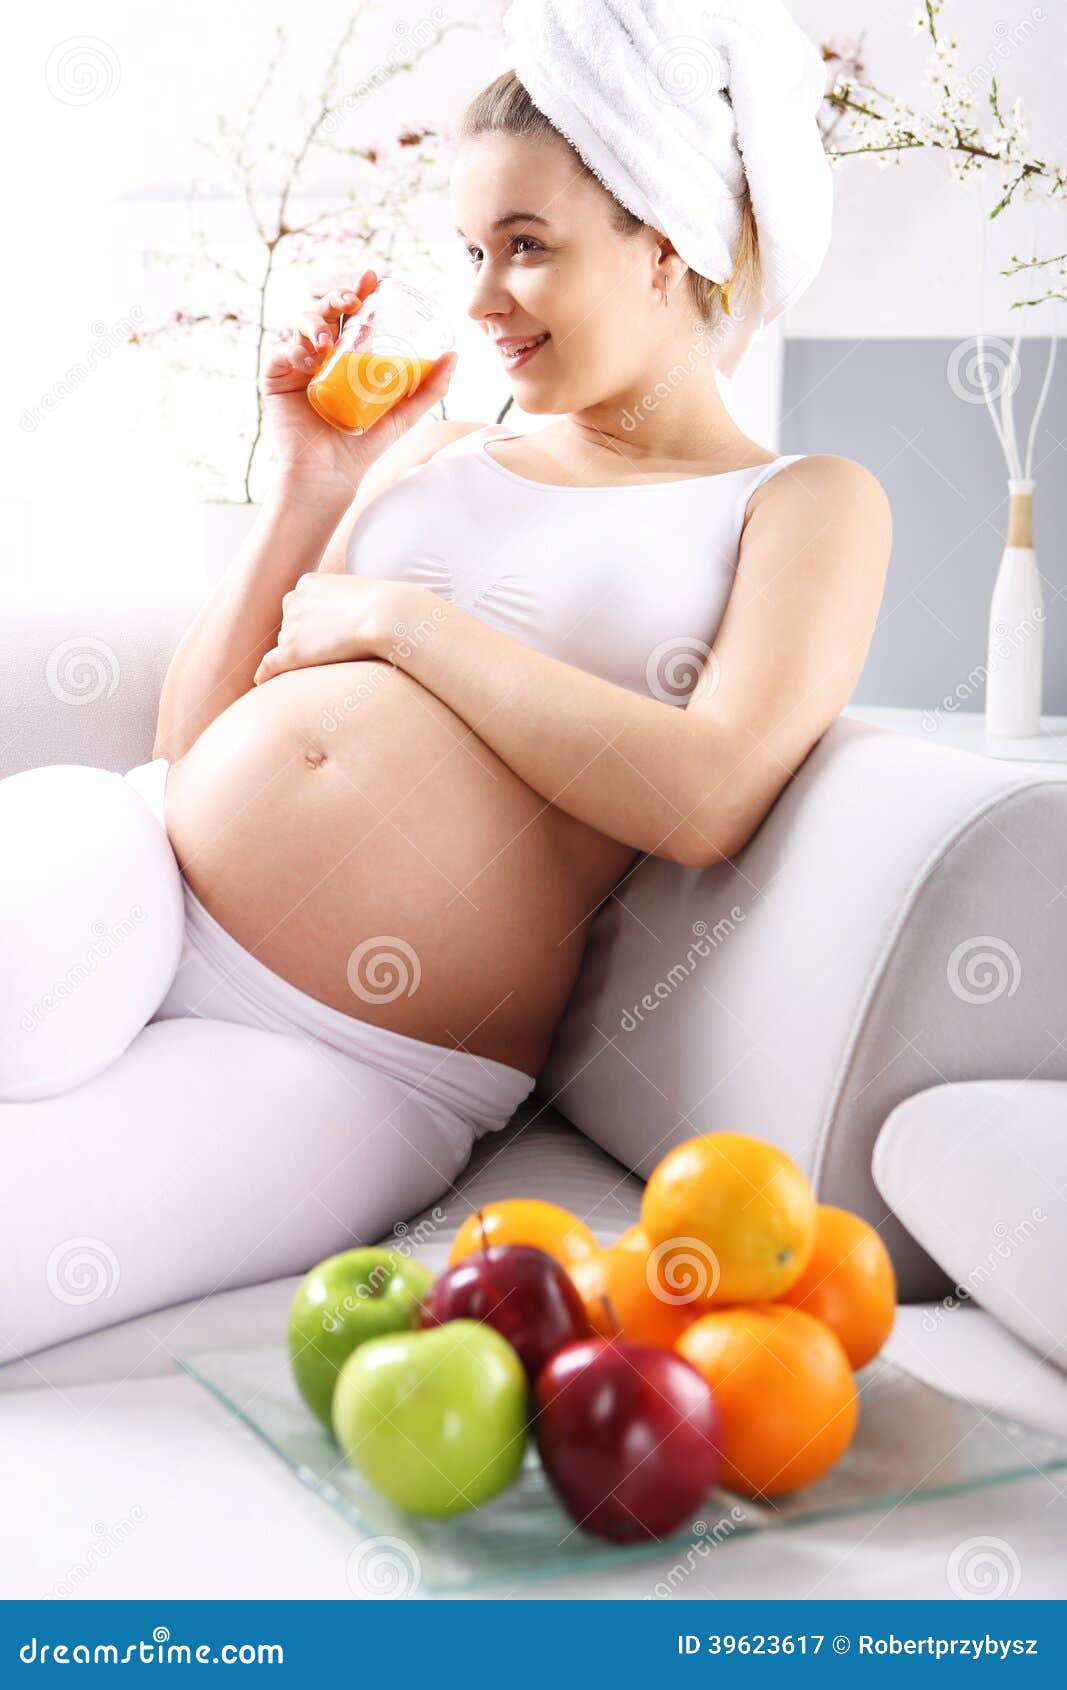 Eating Pregnant Belly Nude - Pregnant Woman Drinking Fruit Juice Stock Image - Image of caucasian,  dolls: 39623617